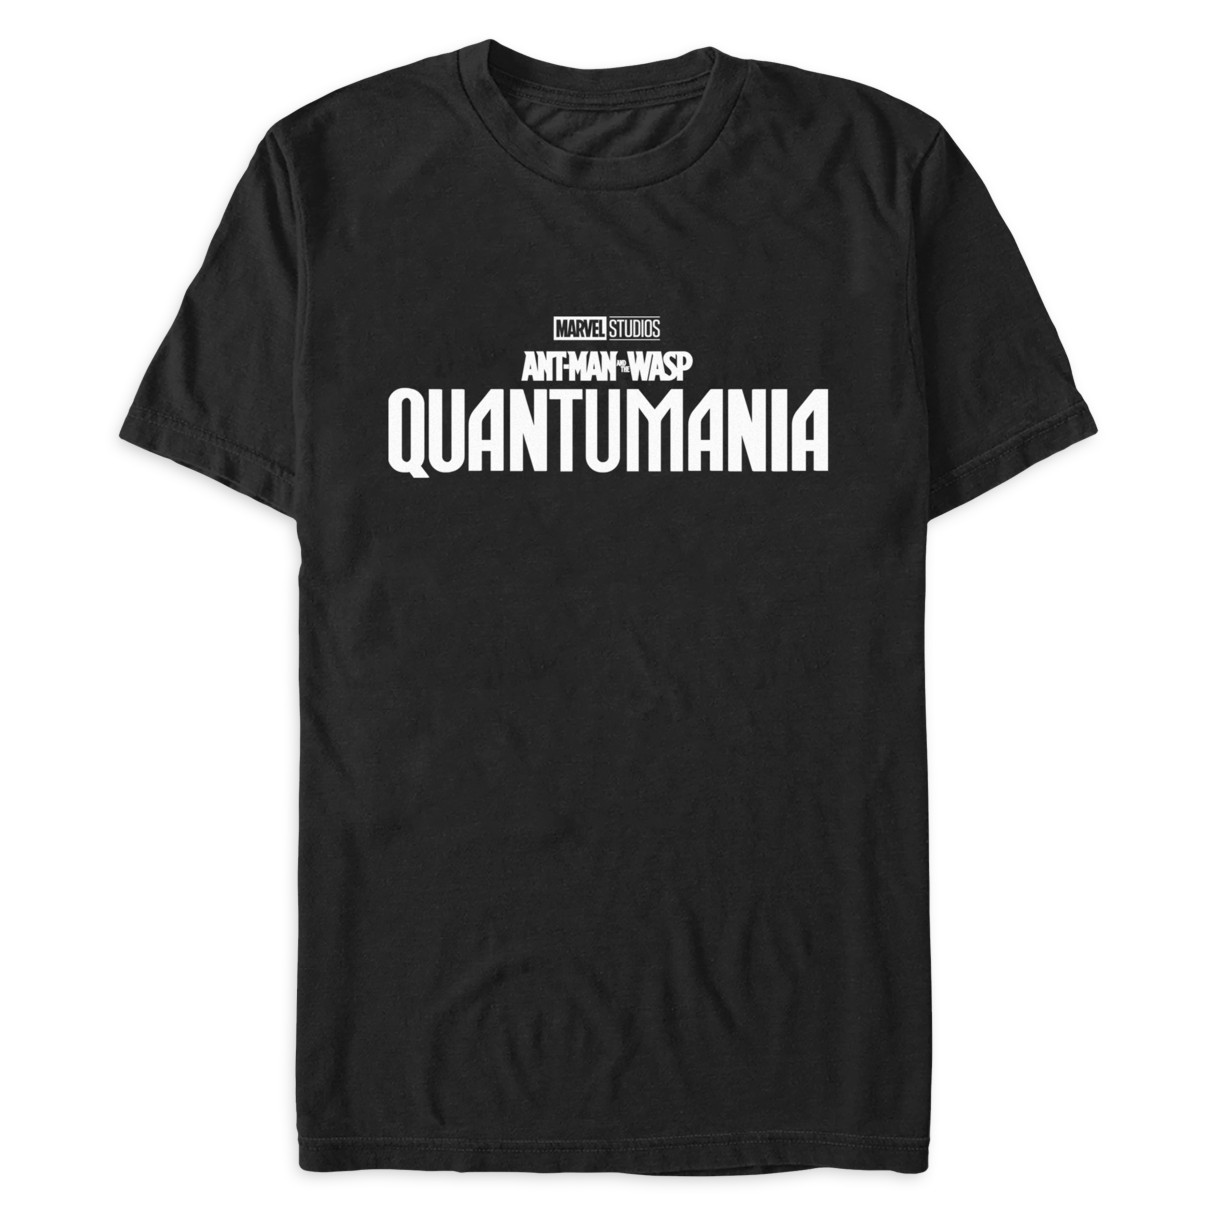 Ant-Man and the Wasp: Quantumania T-Shirt for Adults